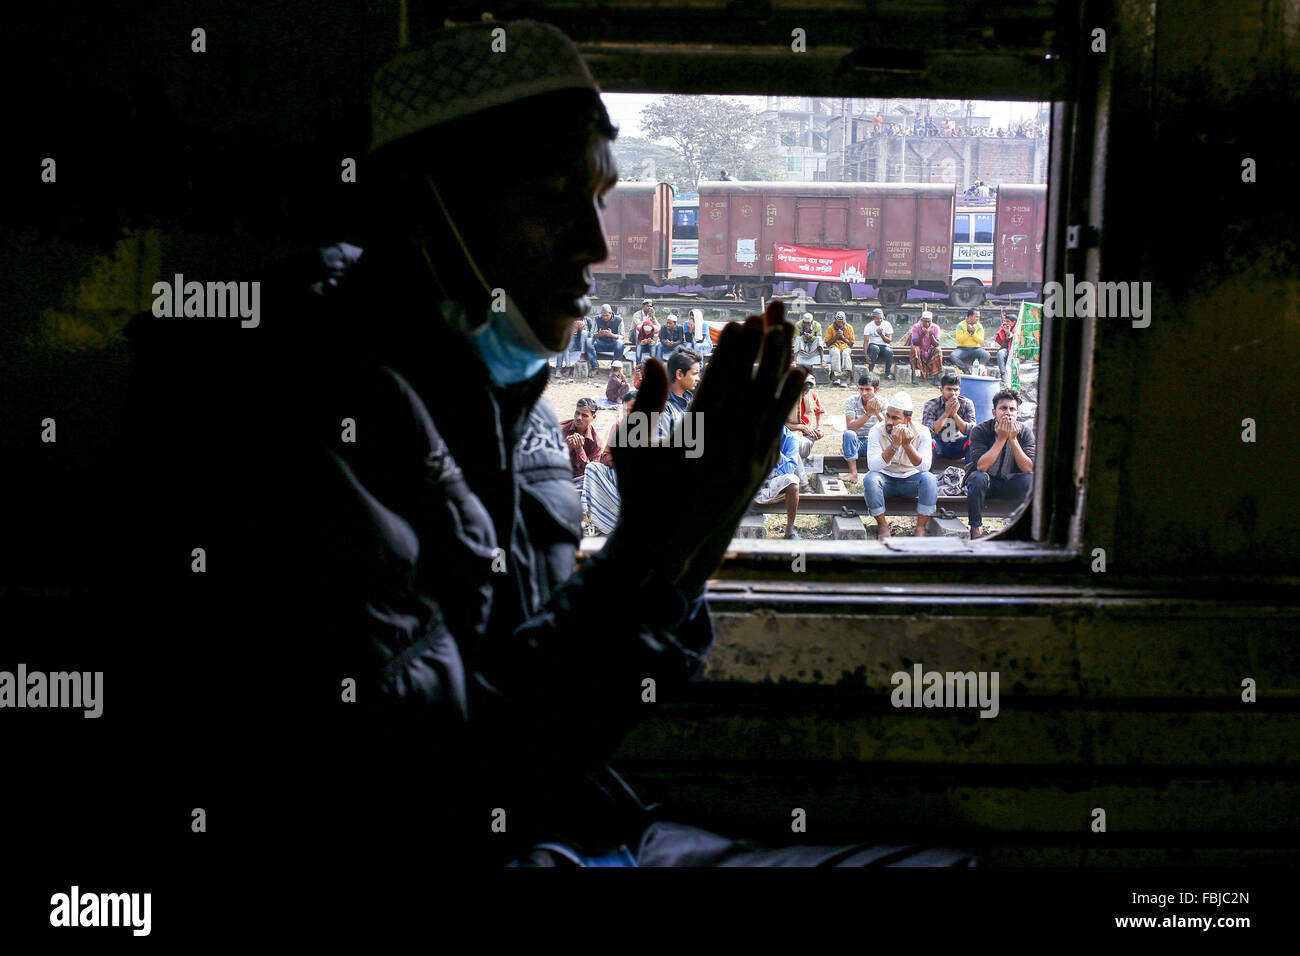 Jan. 17, 2016 - Gazipur, Bangladesh - Muslim devotees gathered in Bishwa Istema at Tongi, Gazipur for the last day of second phase of the event which is the second largest muslim congregation after Hajj. (Credit Image: © Mohammad Ponir Hossain via ZUMA Wire) Stock Photo